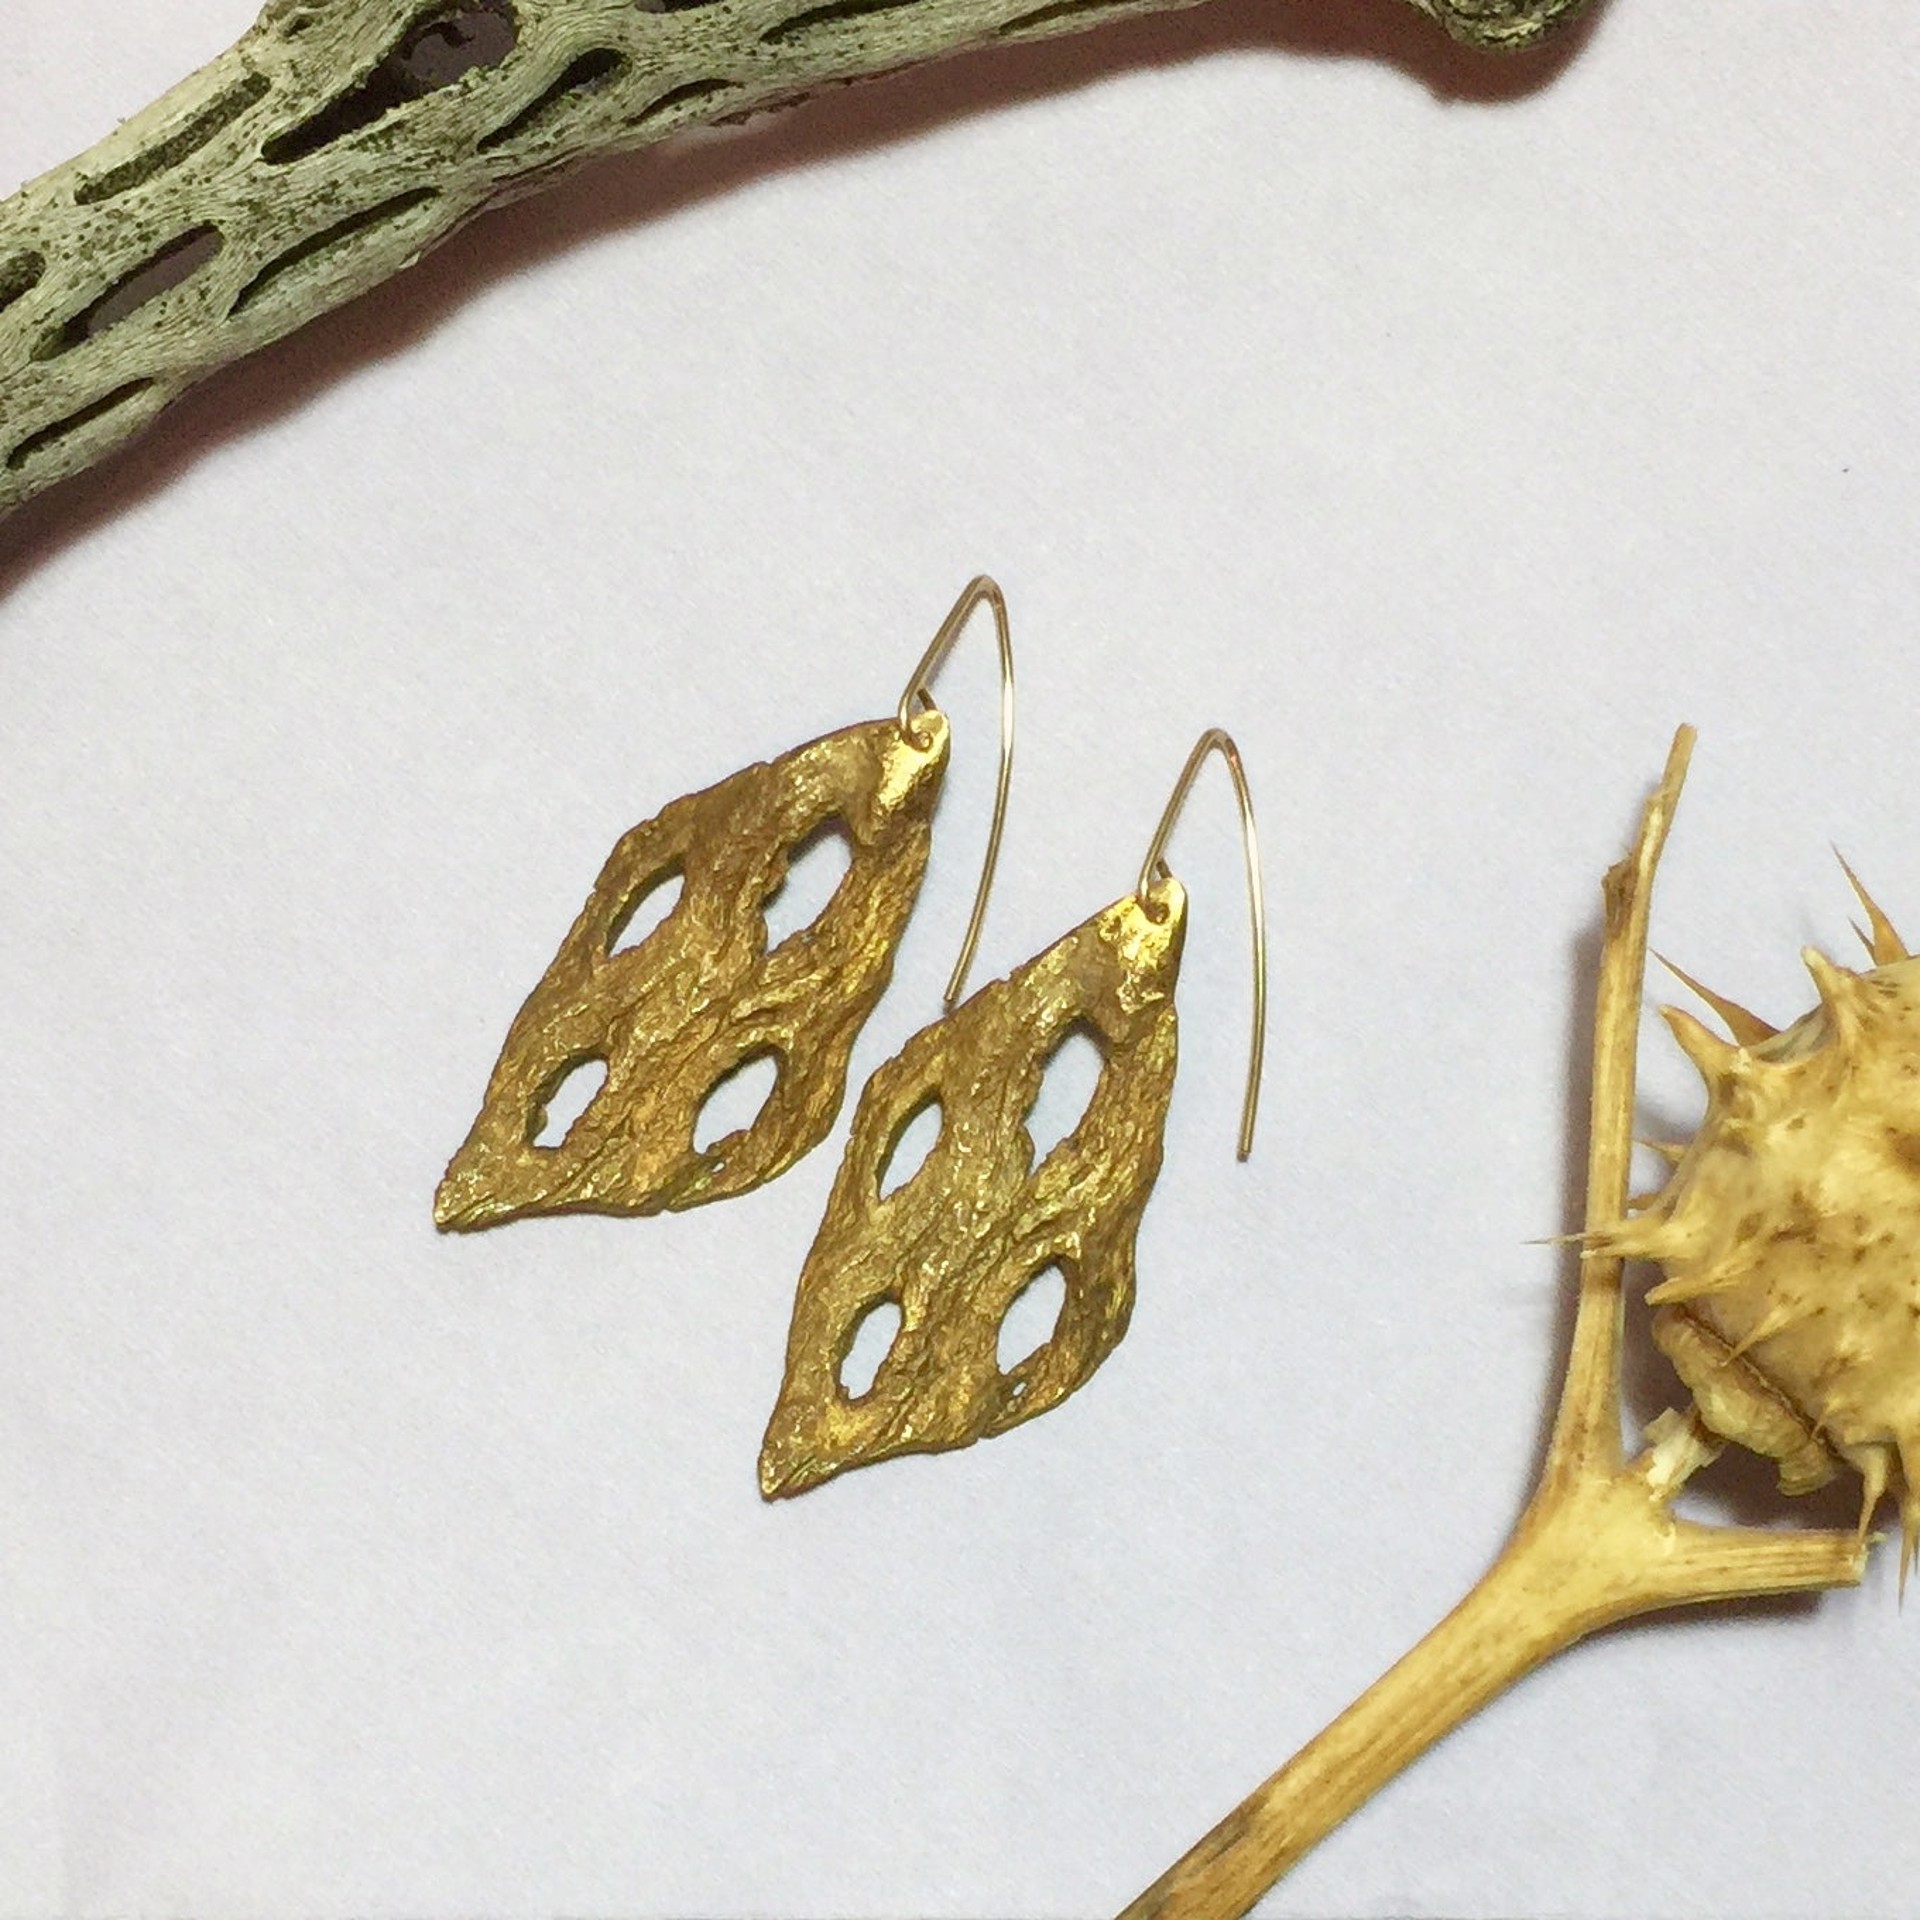 Cholla Cactus Cast Earrings by Clementine & Co. Jewelry